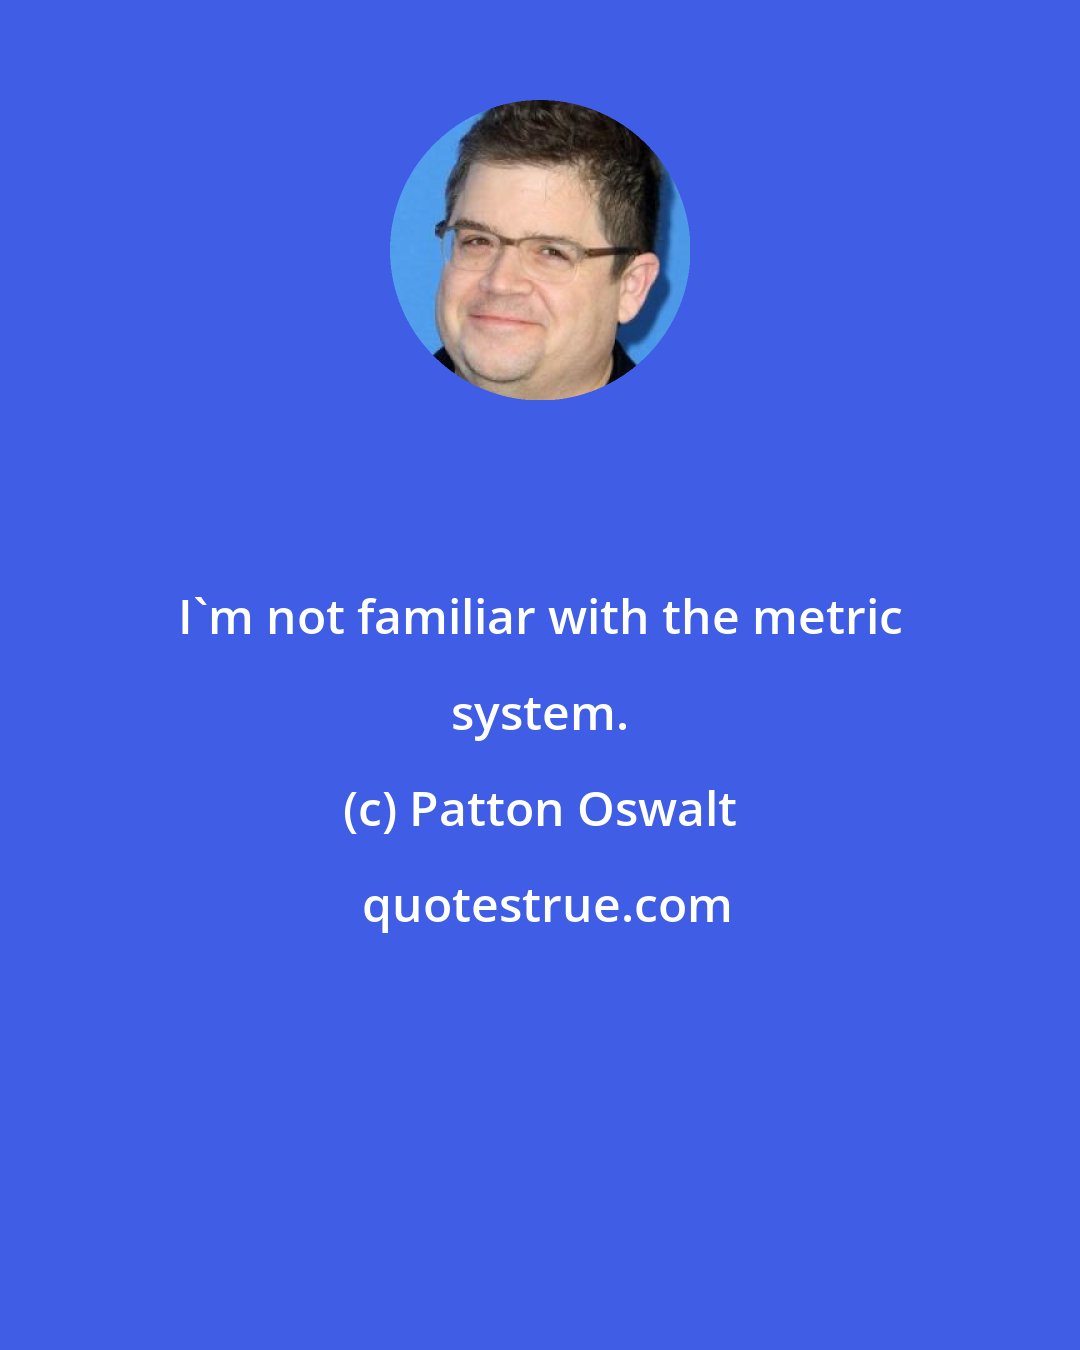 Patton Oswalt: I'm not familiar with the metric system.